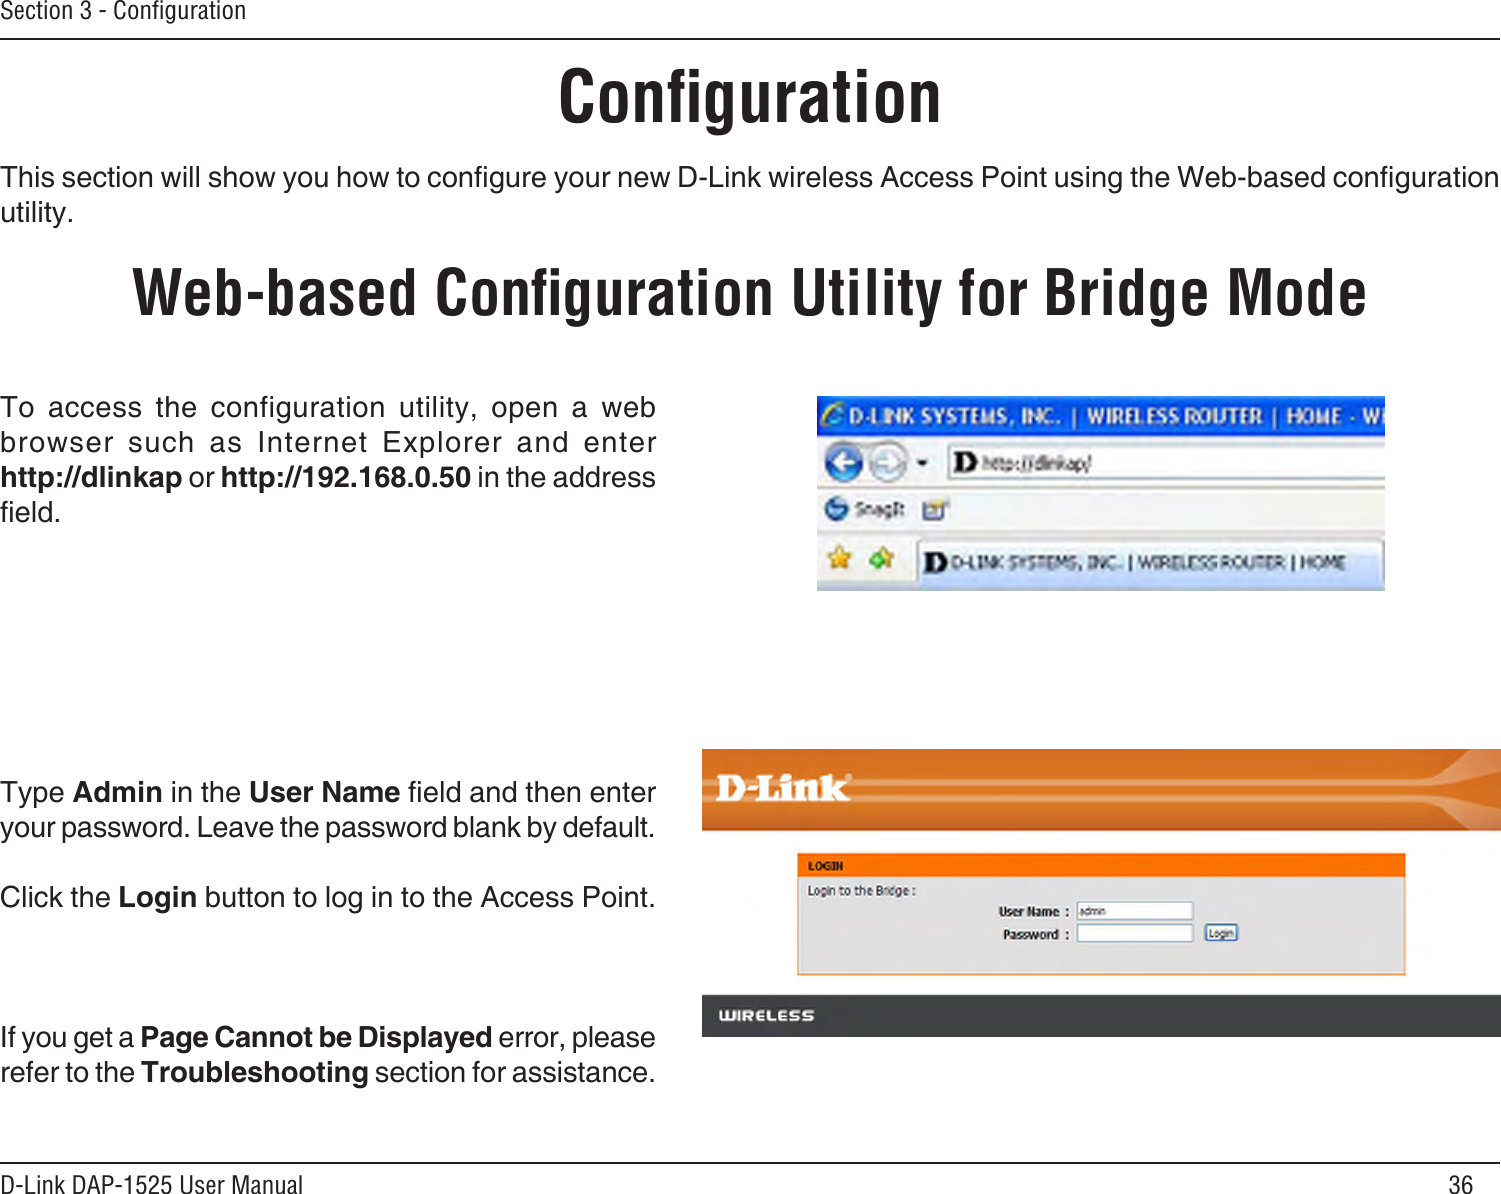 36D-Link DAP-1525 User ManualSection 3 - ConﬁgurationConﬁgurationThis section will show you how to congure your new D-Link wireless Access Point using the Web-based conguration utility.Web-based Conﬁguration Utility for Bridge ModeTo  access  the  configuration  utility,  open  a  web browser  such  as  Internet  Explorer  and  enter  http://dlinkap or http://192.168.0.50 in the address eld.Type Admin in the User Name eld and then enter your password. Leave the password blank by default. Click the Login button to log in to the Access Point.If you get a Page Cannot be Displayed error, please refer to the Troubleshooting section for assistance.